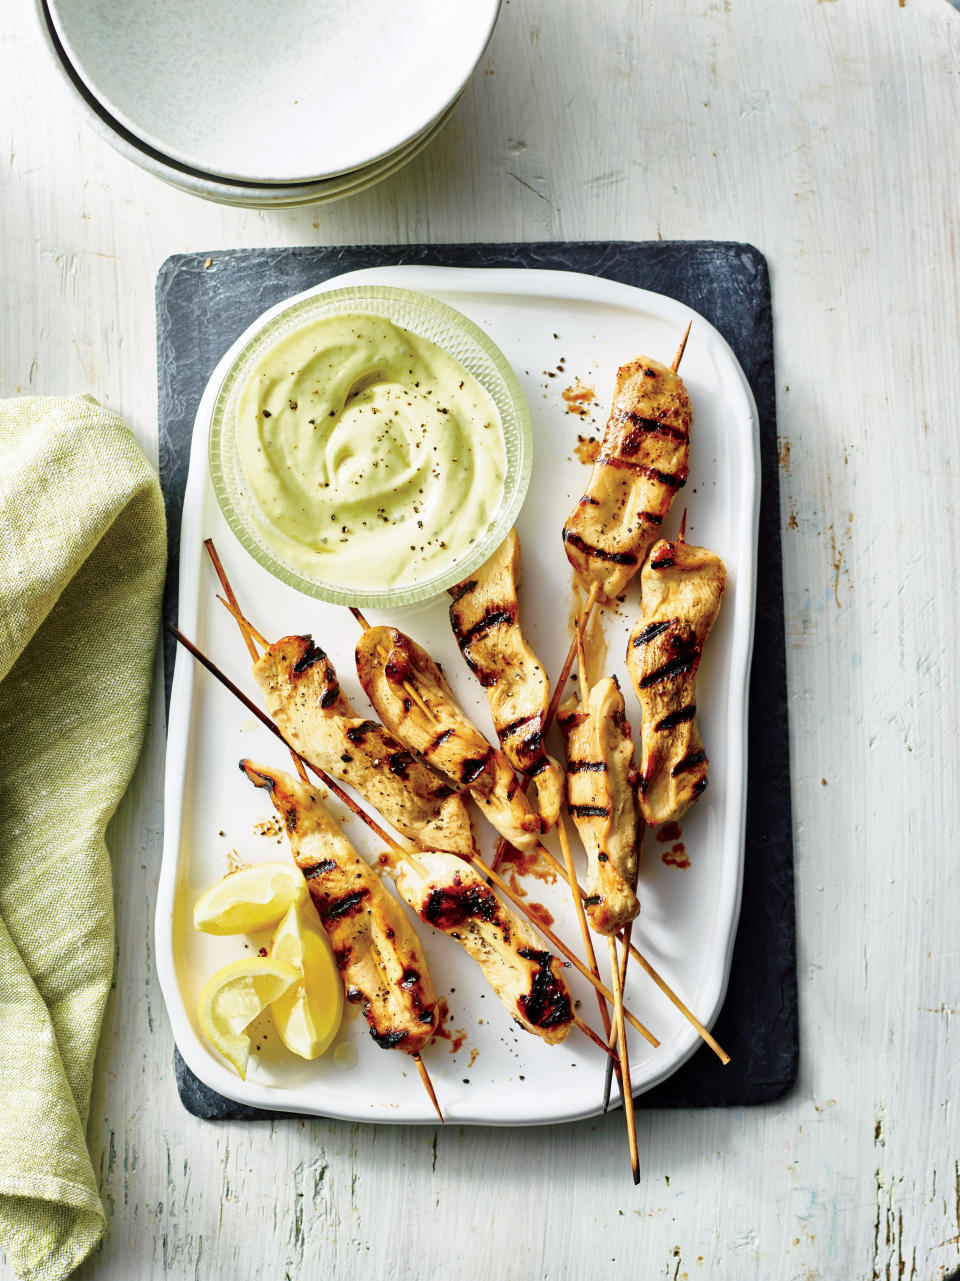 Grilled Chicken Skewers with Wasabi Mayo